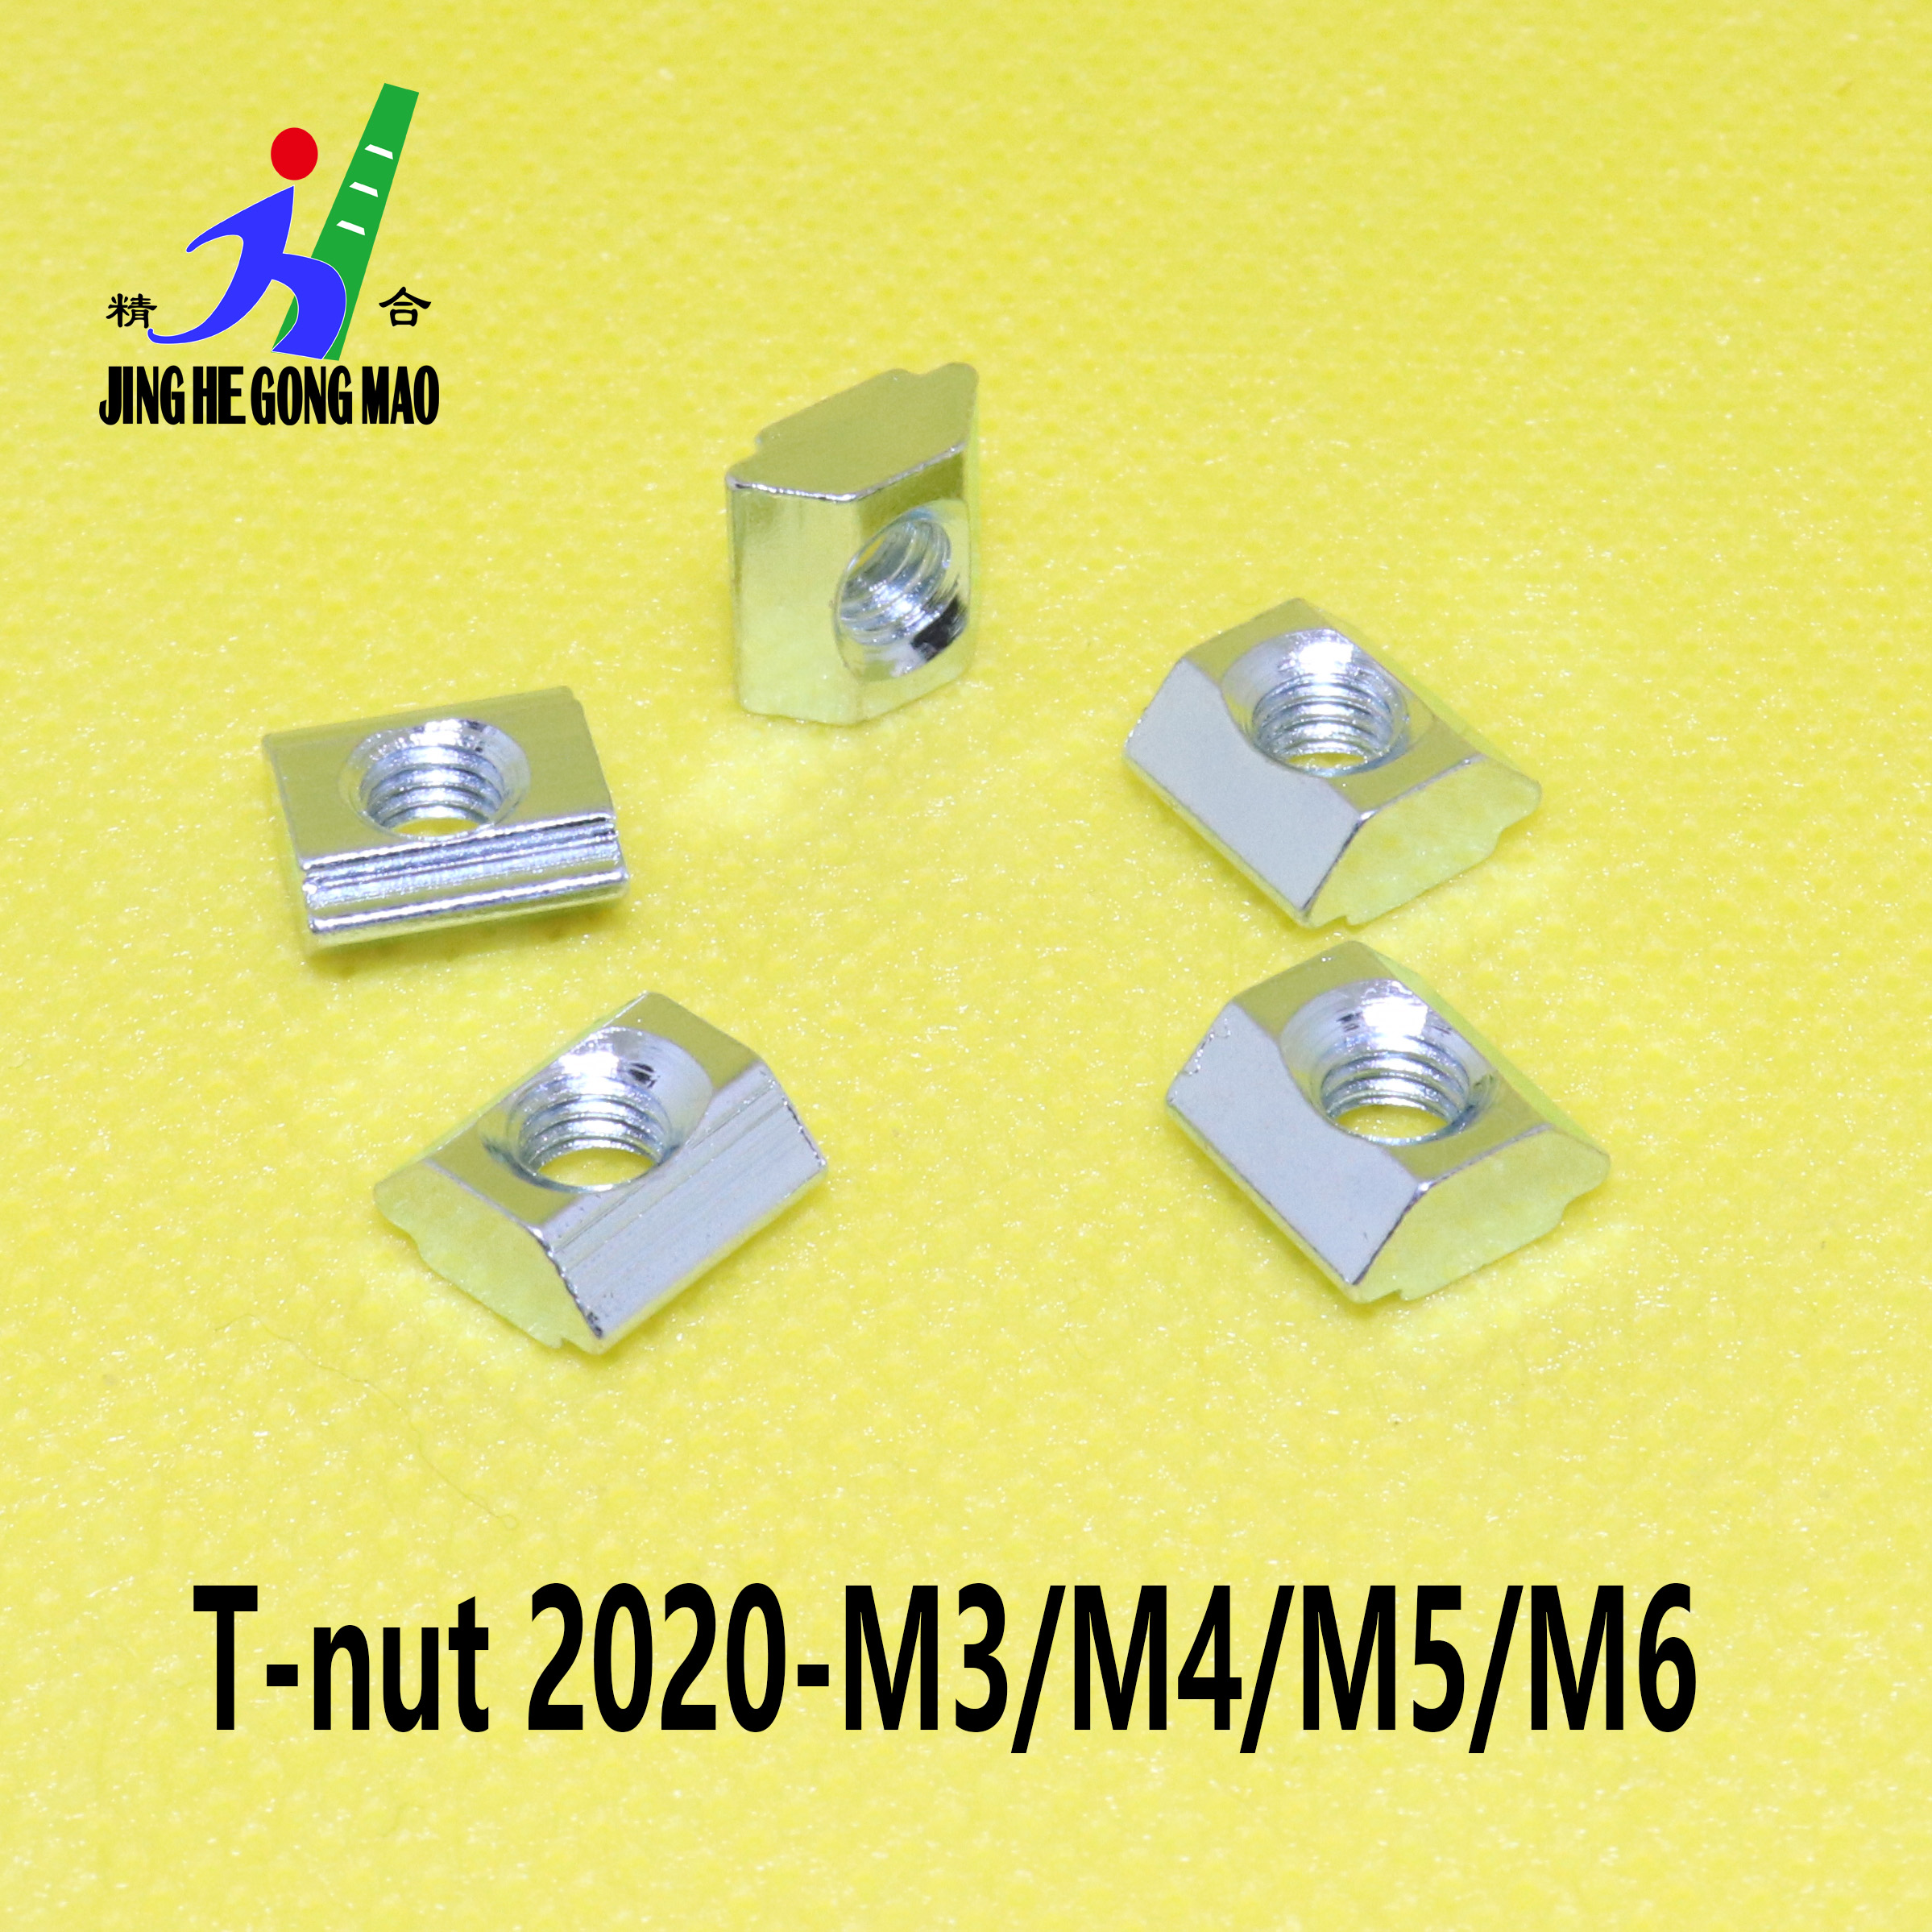 T-Nuts Roll in Slot Nuts Thread M3 M4 M5 M6 T Spring Nuts Half Round Elasticity Nuts for 2020 Series Aluminum Profile Extrusions